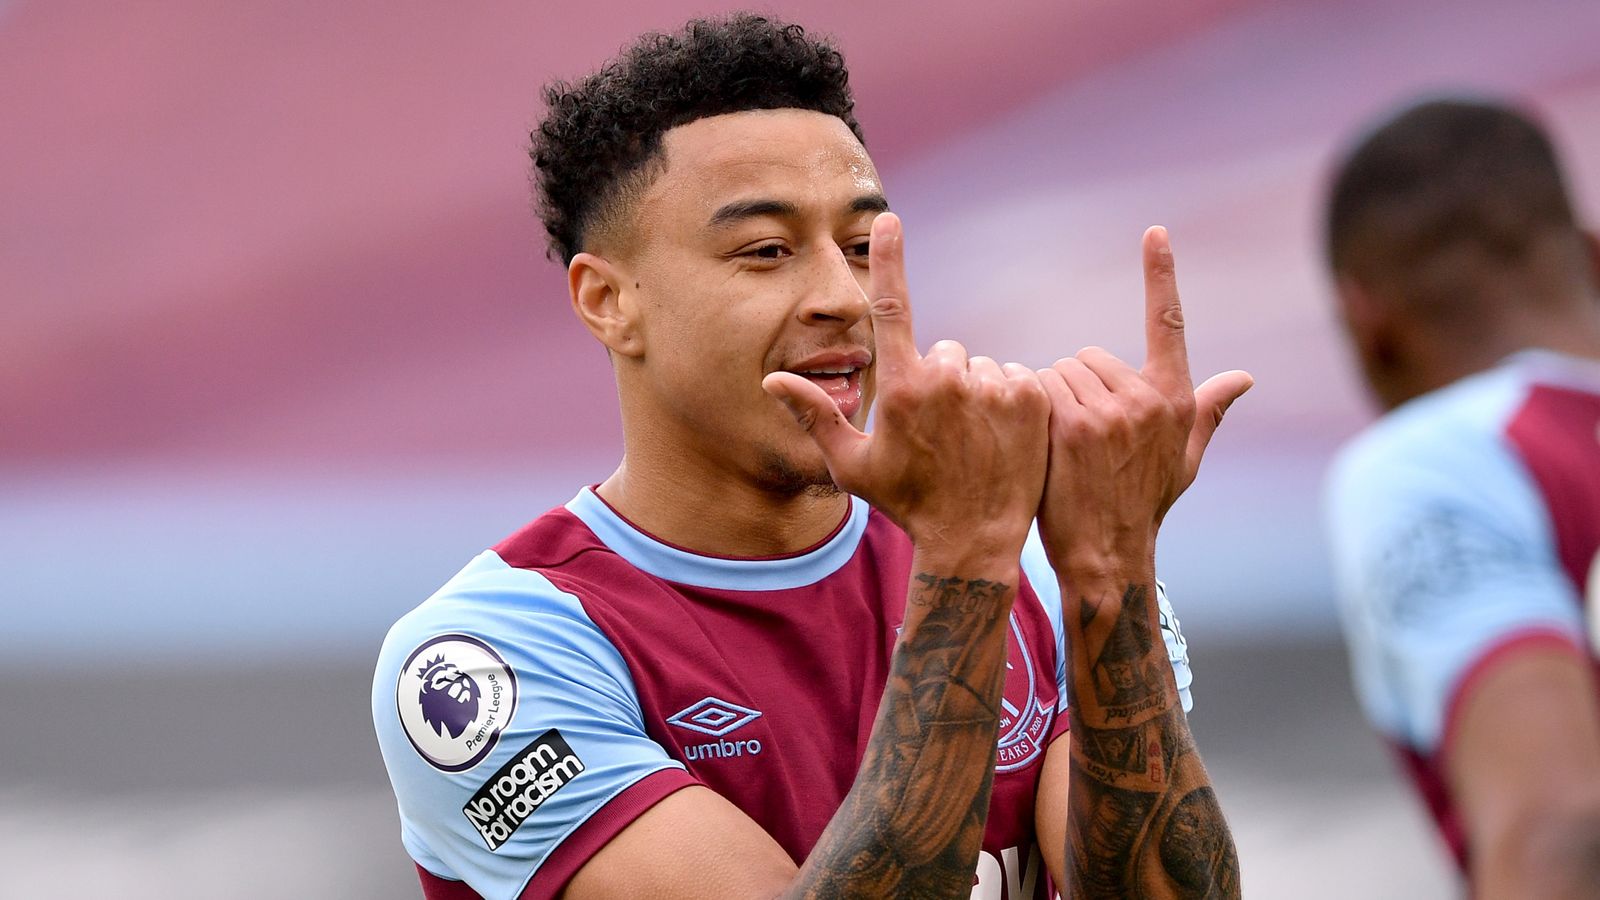 West Ham Vs Leicester 3 2 Jesse Lingard Scores 2 Goals Latest Sports News In Ghana Sports News Around The World